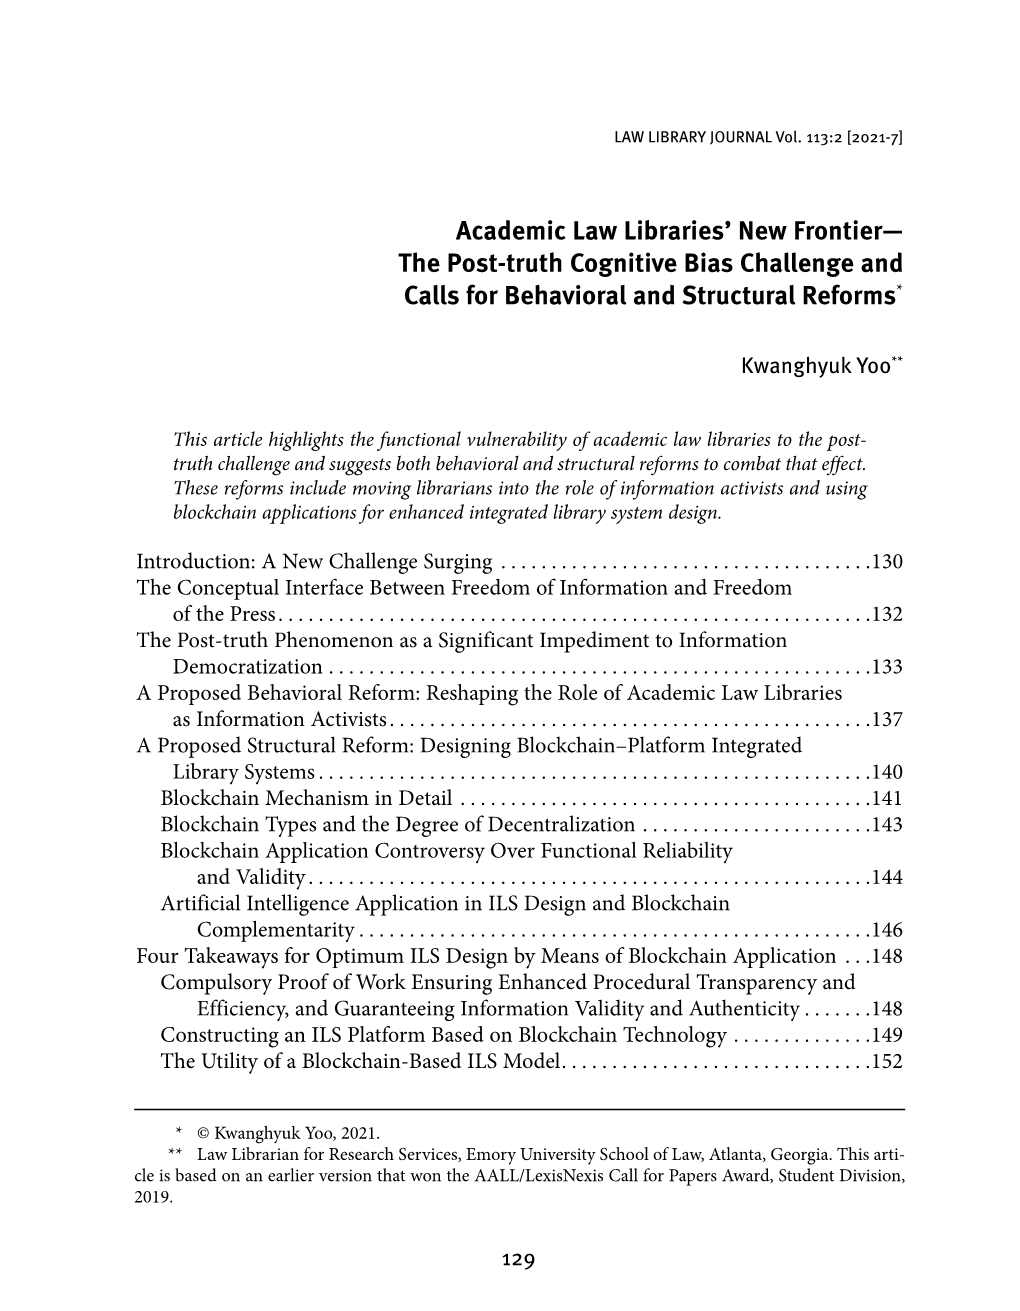 Law Library Journal / Volume 113, No. 2 (Spring 2021)